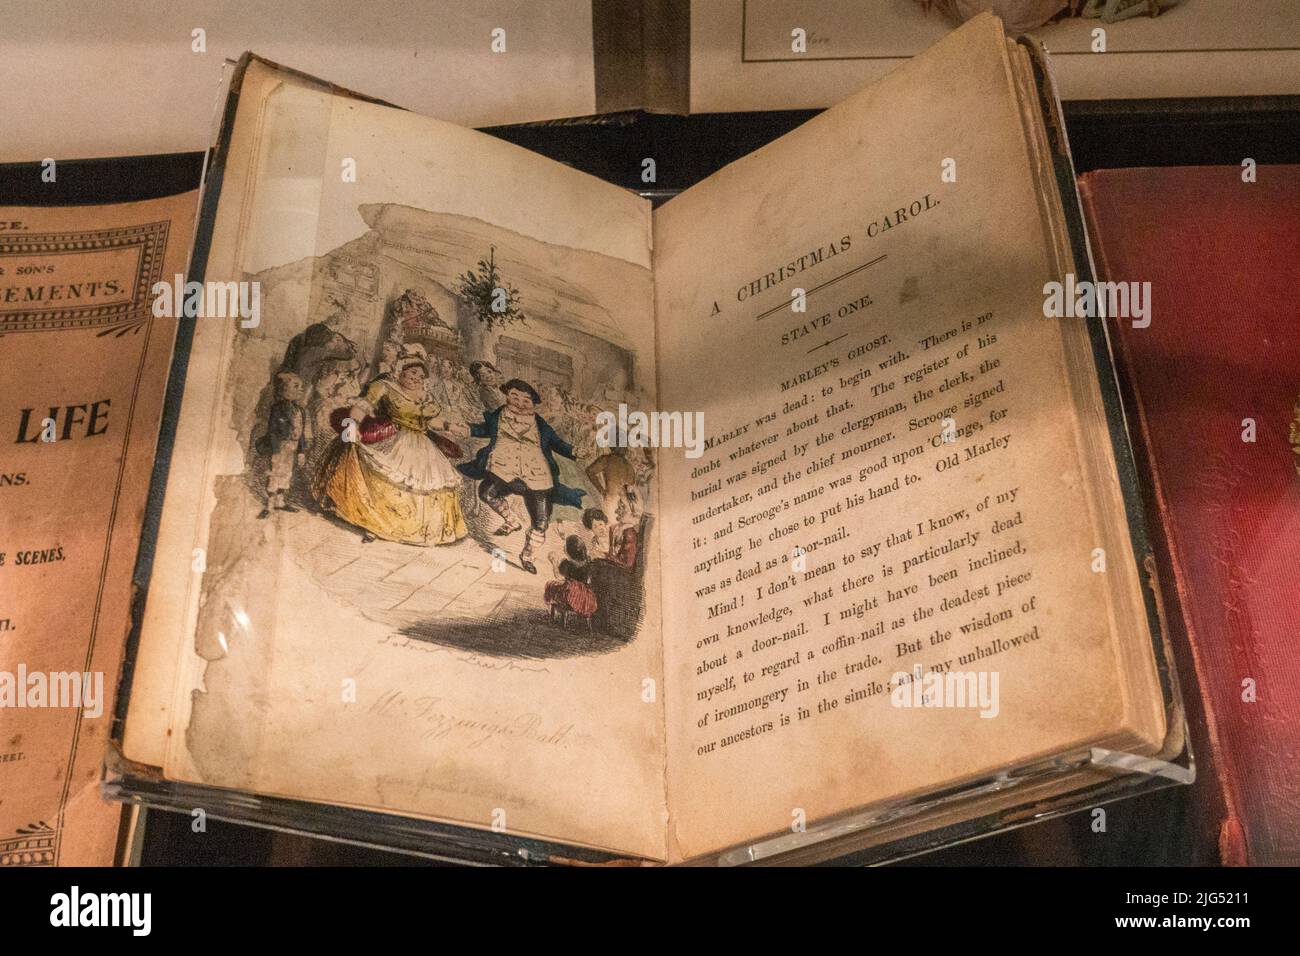 A copy of 'A Christmas Carol' by Charles Dickens (c1843) on display in the UK. Stock Photo